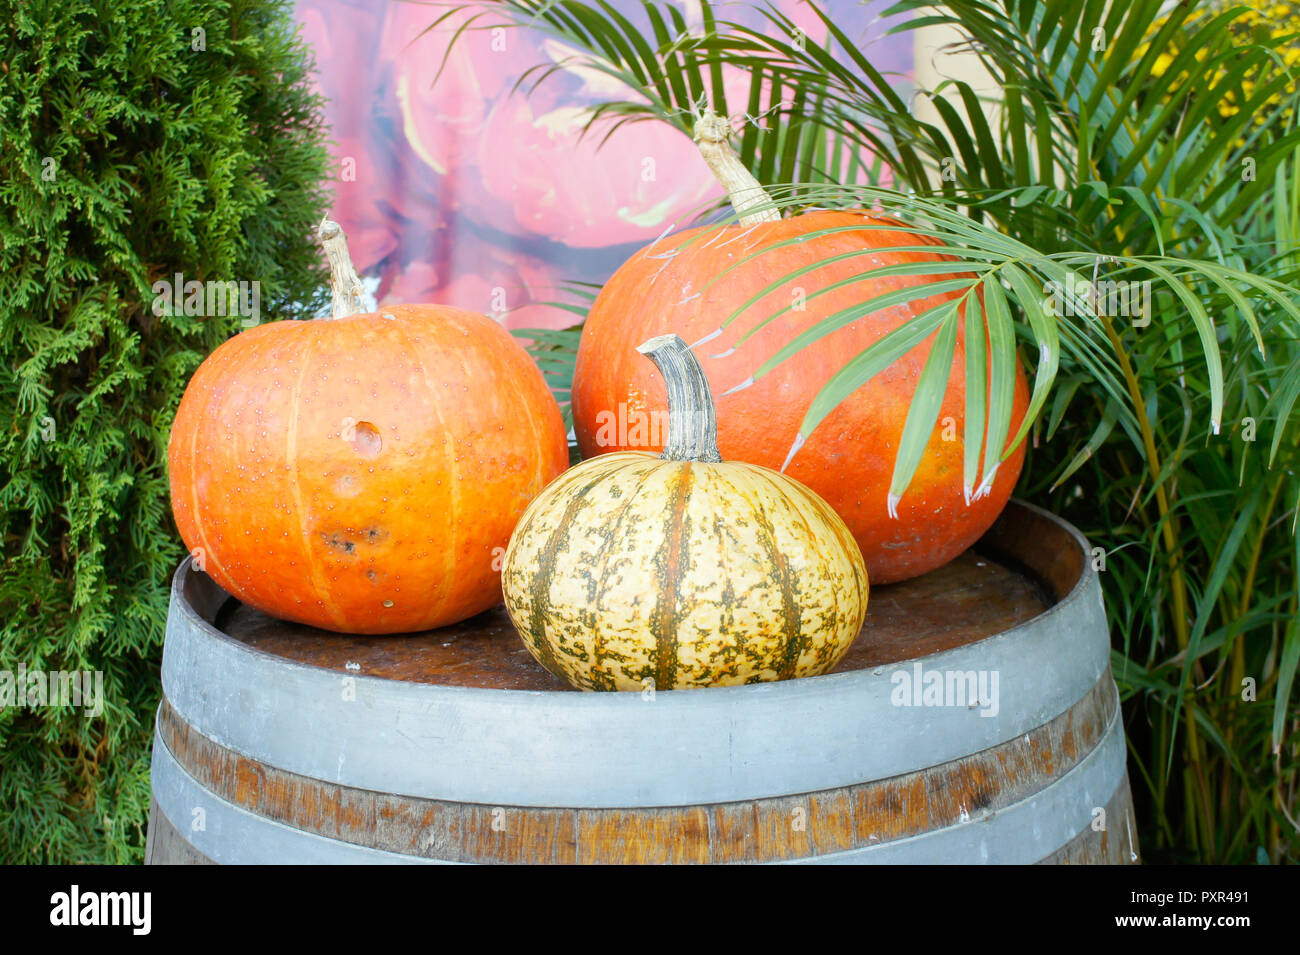 A display of pumpkins on a wooden barrel outside a building Stock Photo